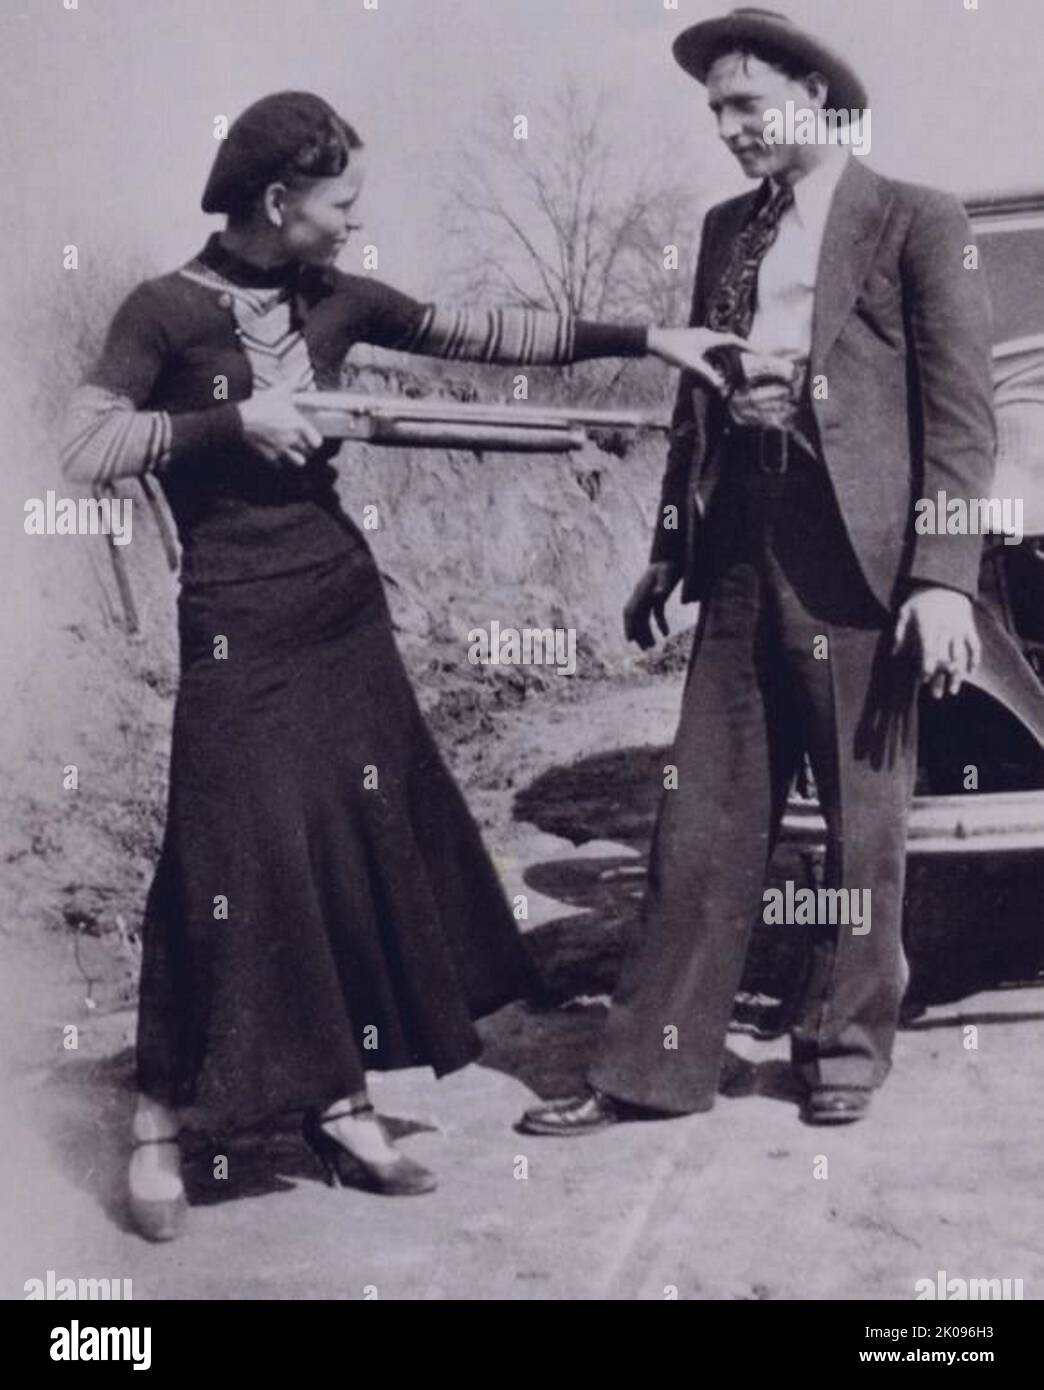 Bonnie and Clyde. Bonnie Elizabeth Parker (October 1, 1910 - May 23, 1934) and Clyde Chestnut Barrow (March 24, 1909 - May 23, 1934) were an American criminal couple who travelled the Central United States with their gang during the Great Depression, known for their bank robberies, although they preferred to rob small stores or rural funeral homes. Their exploits captured the attention of the American press and its readership during what is occasionally referred to as the 'public enemy era' between 1931 and 1934. Stock Photo